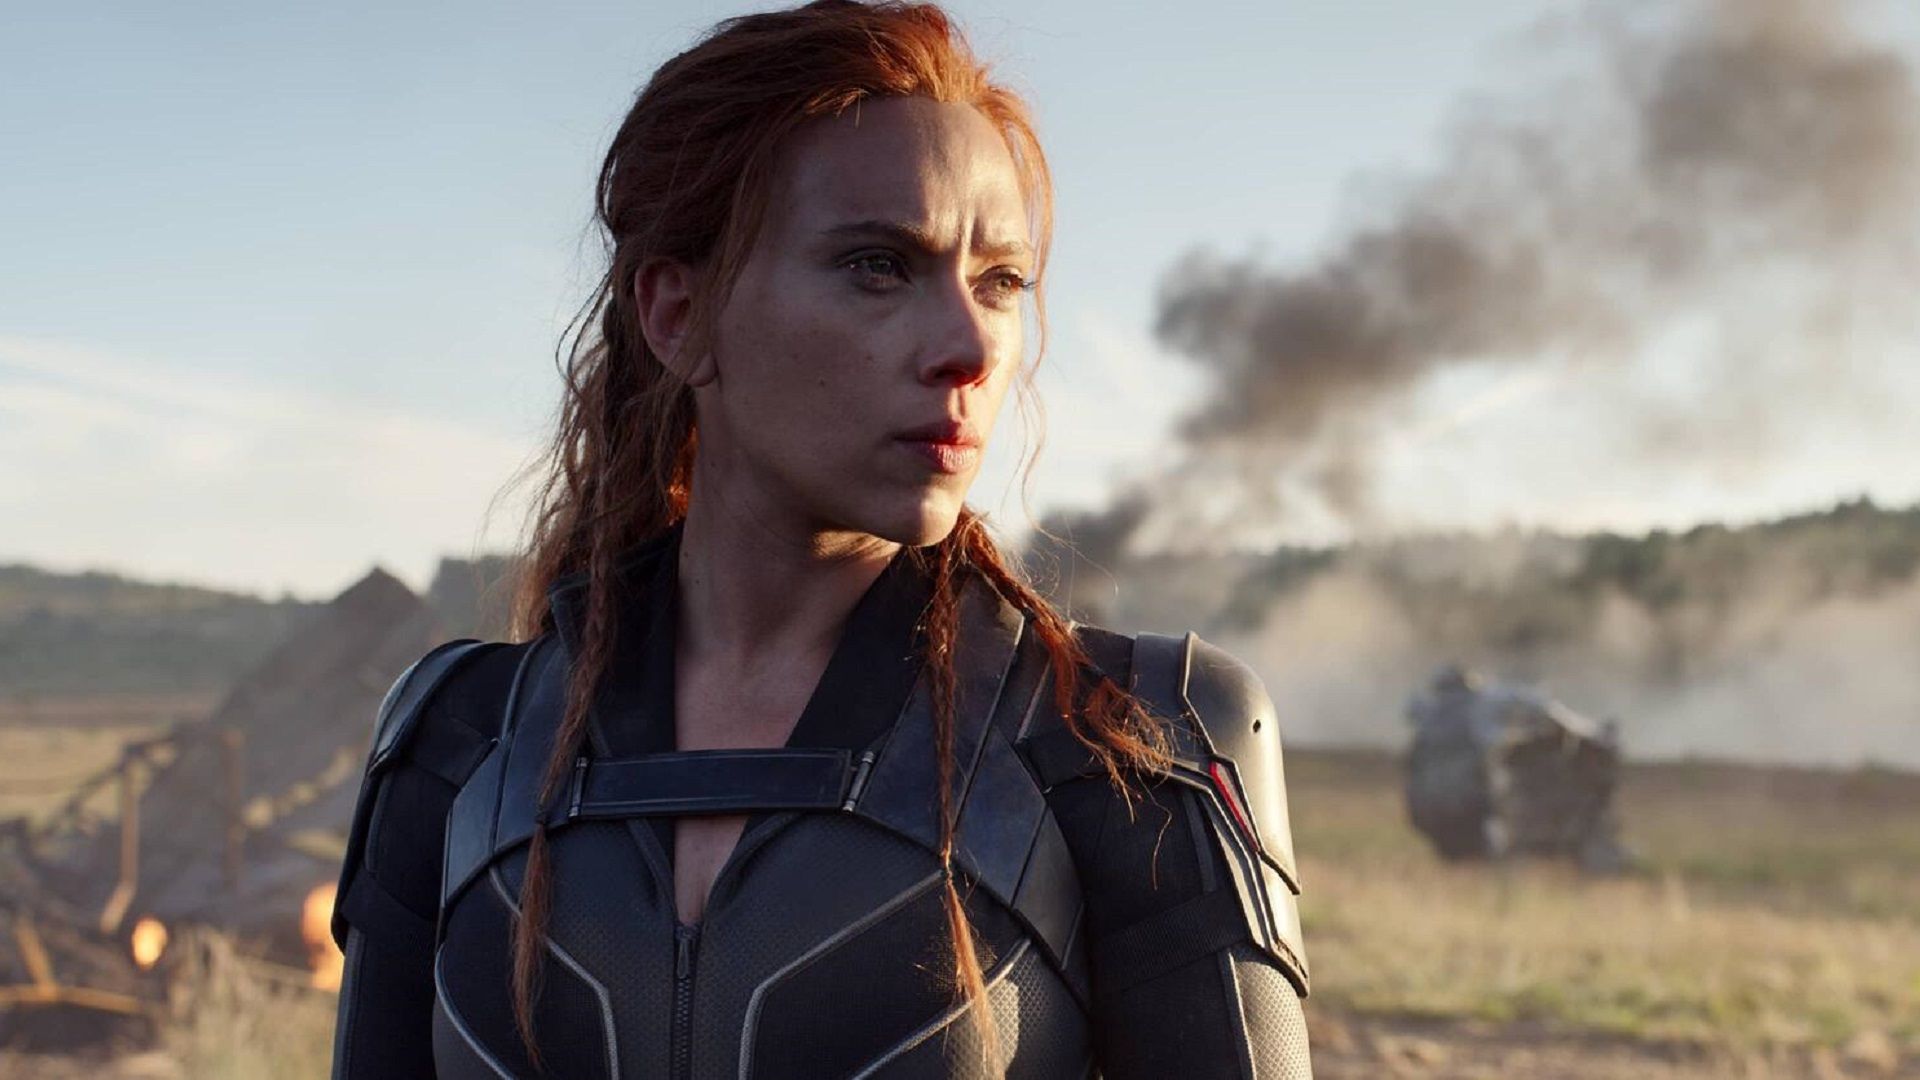 Black Widow: 10 things you may not know about the Marvel character